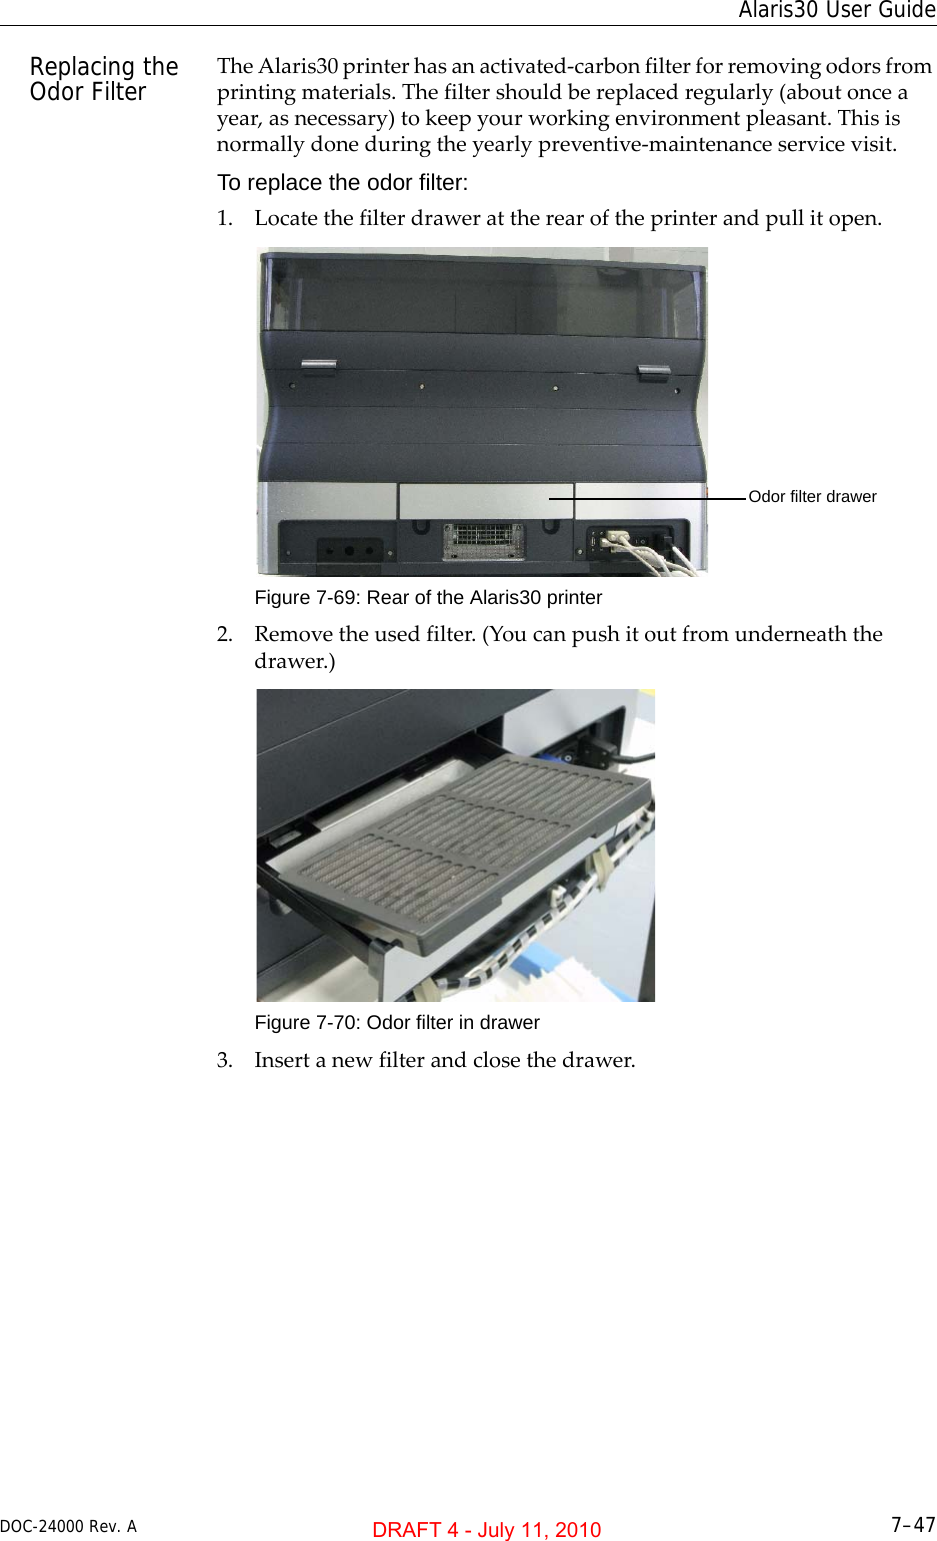 DOC-24000 Rev. A 7–47Alaris30 User GuideReplacing the Odor Filter TheAlaris30printerhasanactivated‐carbonfilterforremovingodorsfromprintingmaterials.Thefiltershouldbereplacedregularly(aboutonceayear,asnecessary)tokeepyourworkingenvironmentpleasant.Thisisnormallydoneduringtheyearlypreventive‐maintenanceservicevisit.To replace the odor filter:1. Locatethefilterdrawerattherearoftheprinterandpullitopen.Figure 7-69: Rear of the Alaris30 printer2. Removetheusedfilter.(Youcanpushitoutfromunderneaththedrawer.)Figure 7-70: Odor filter in drawer3. Insertanewfilterandclosethedrawer.Odor filter drawerDRAFT 4 - July 11, 2010